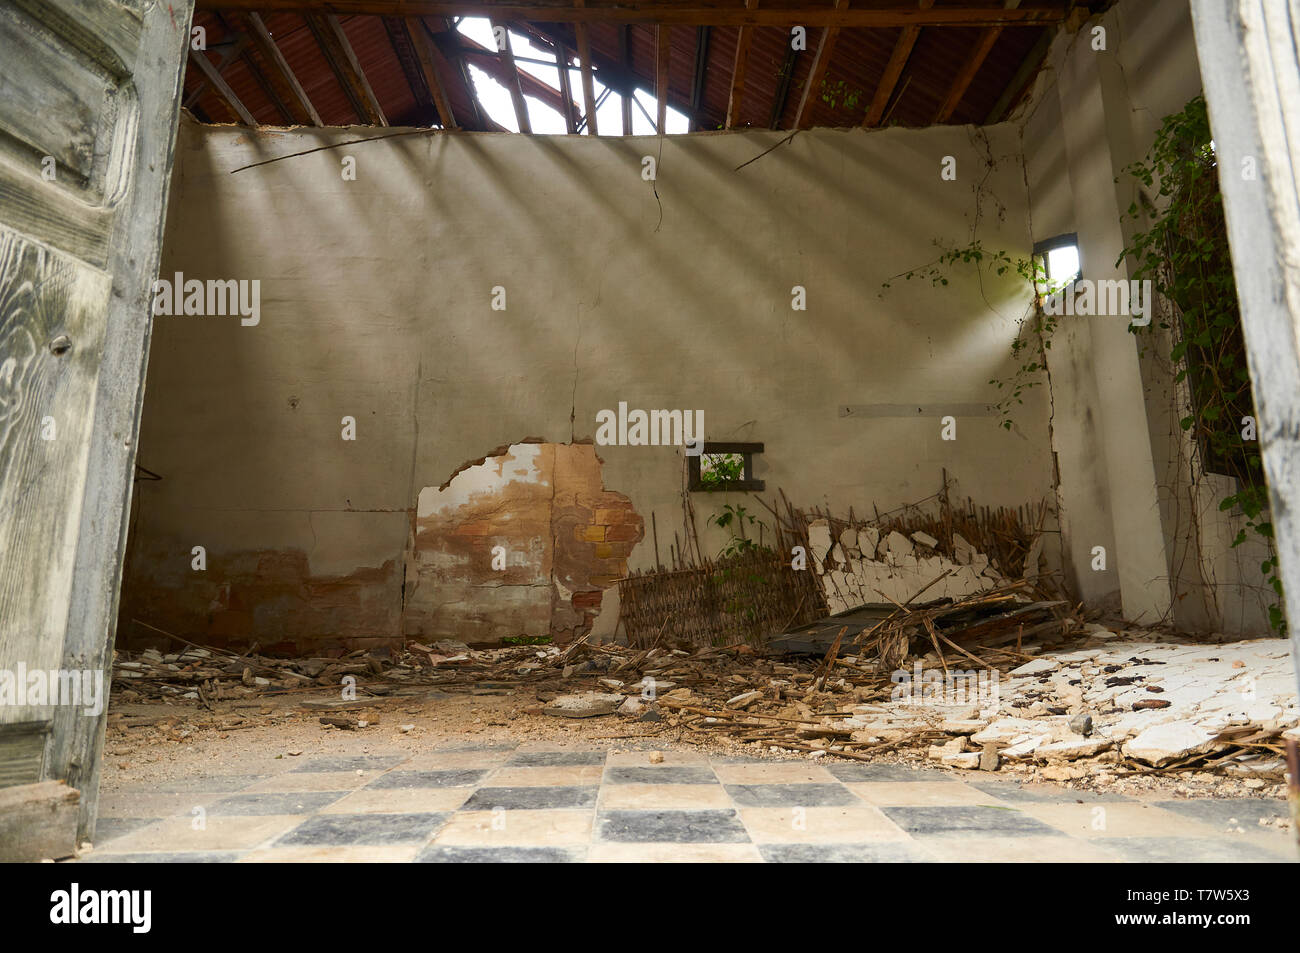 Interior of ruined facilities at the abandoned Canfranc International railway station taken over by plants (Canfranc, Pyrenees, Huesca, Aragon, Spain) Stock Photo